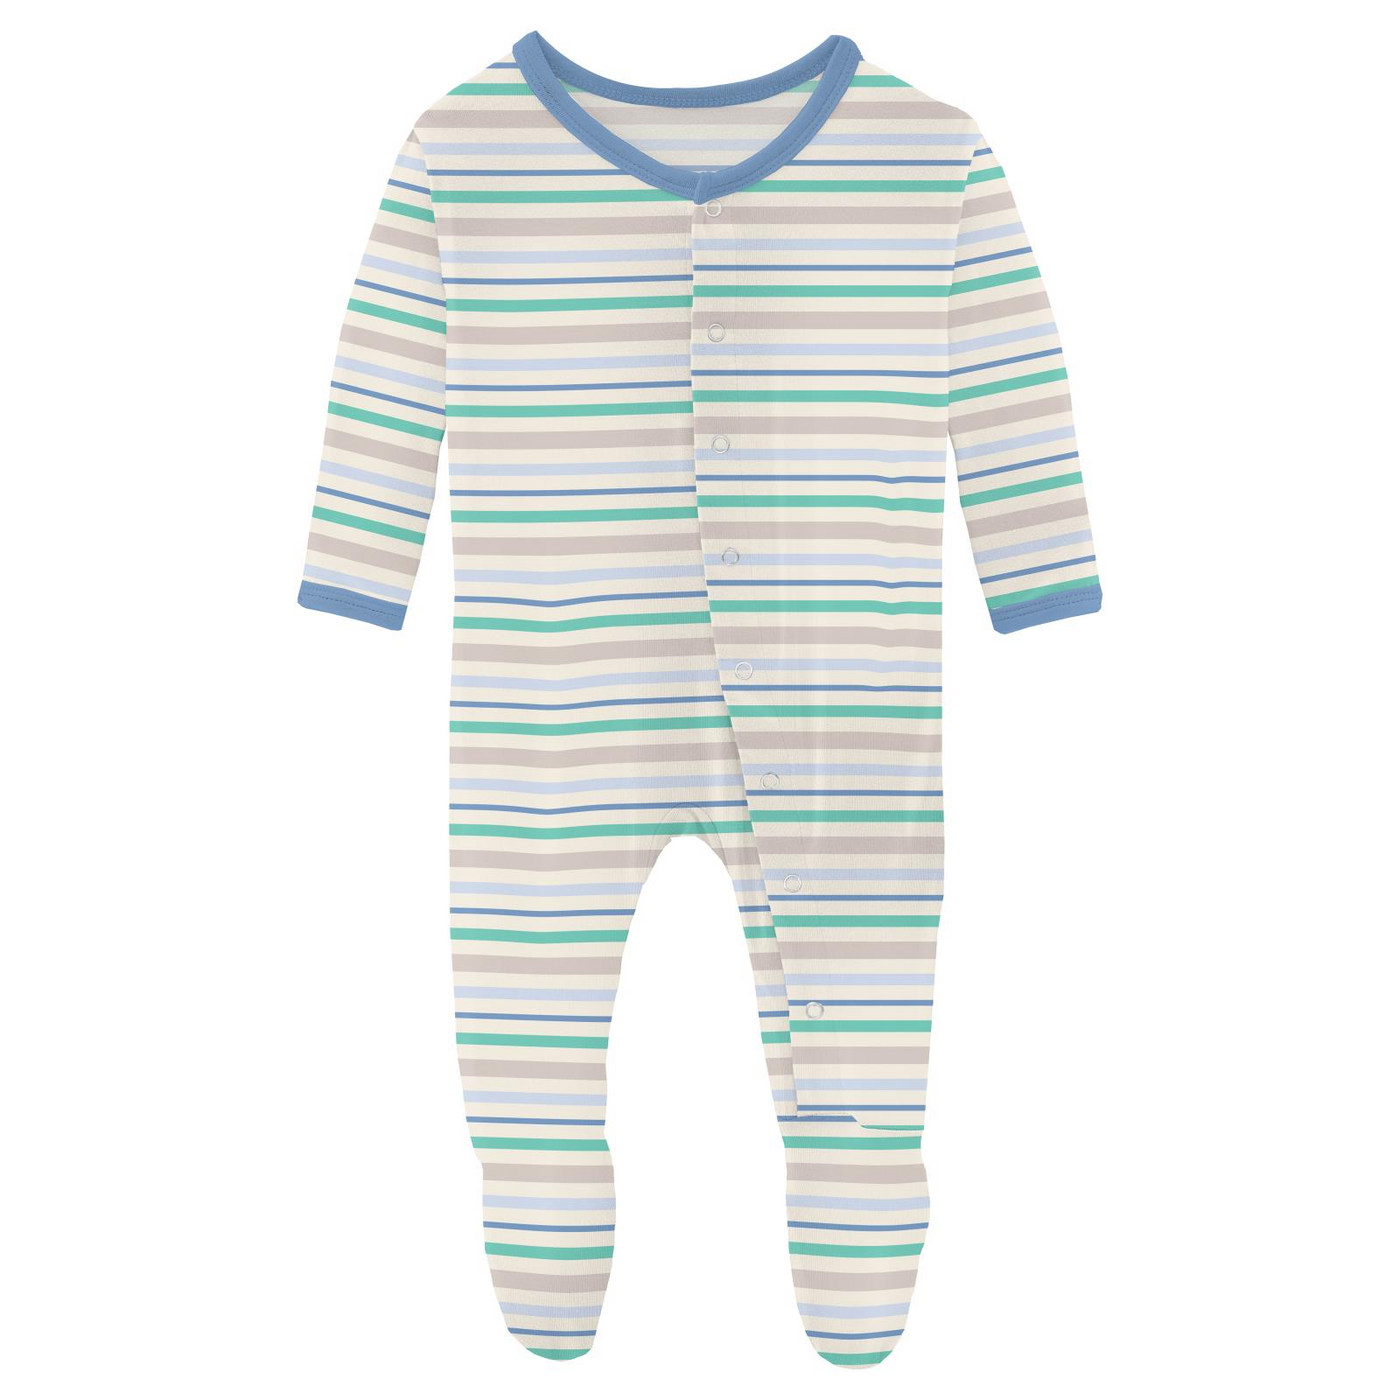 Kickee Pants Footie with Snaps: Mythical Stripe